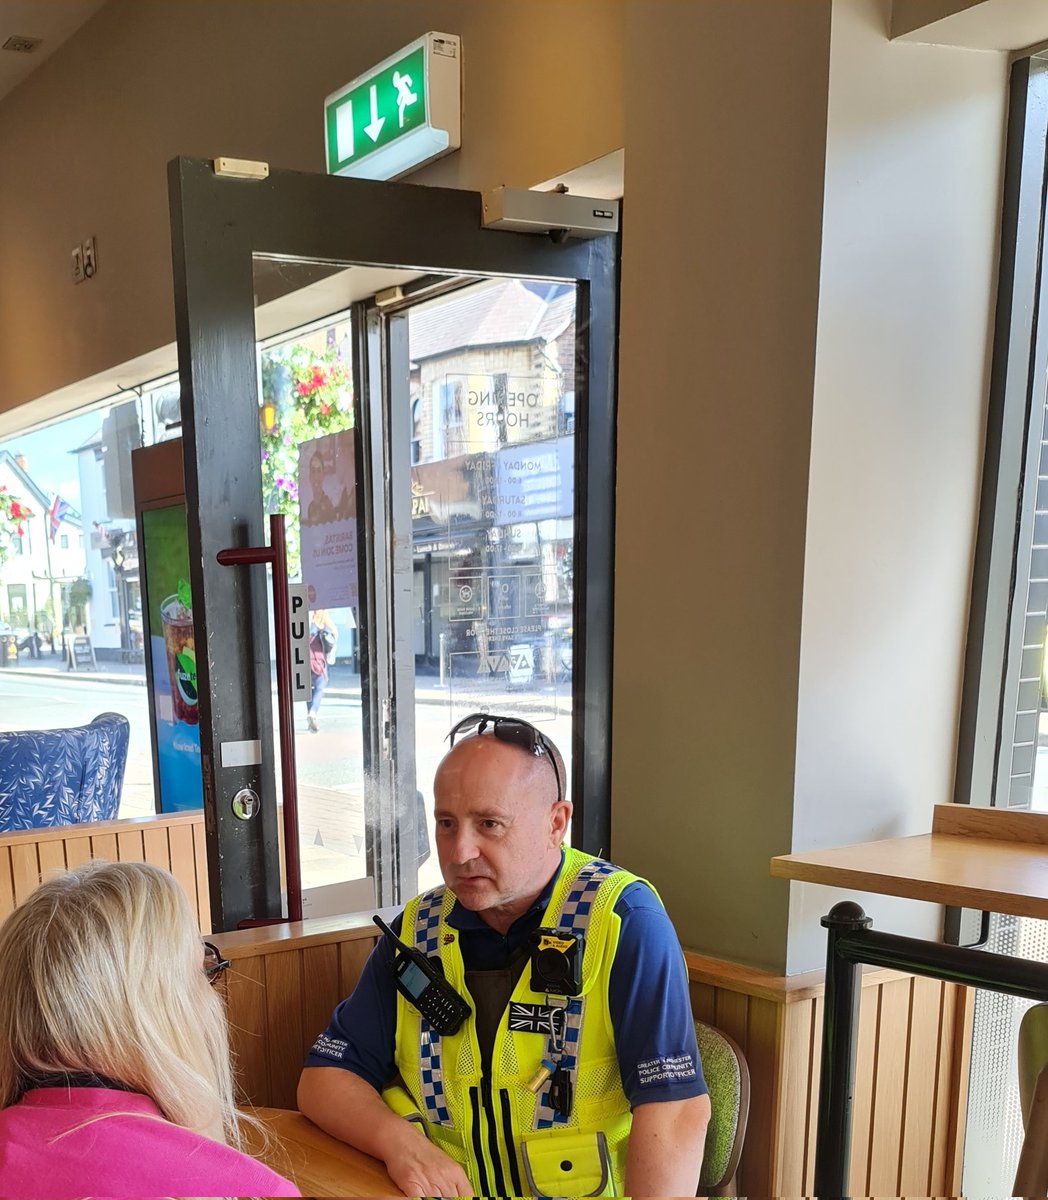 Great to see the officers at the 'Coffee with a Cop' event today. Being out in the community and accessible @GMPAltrincham 👏